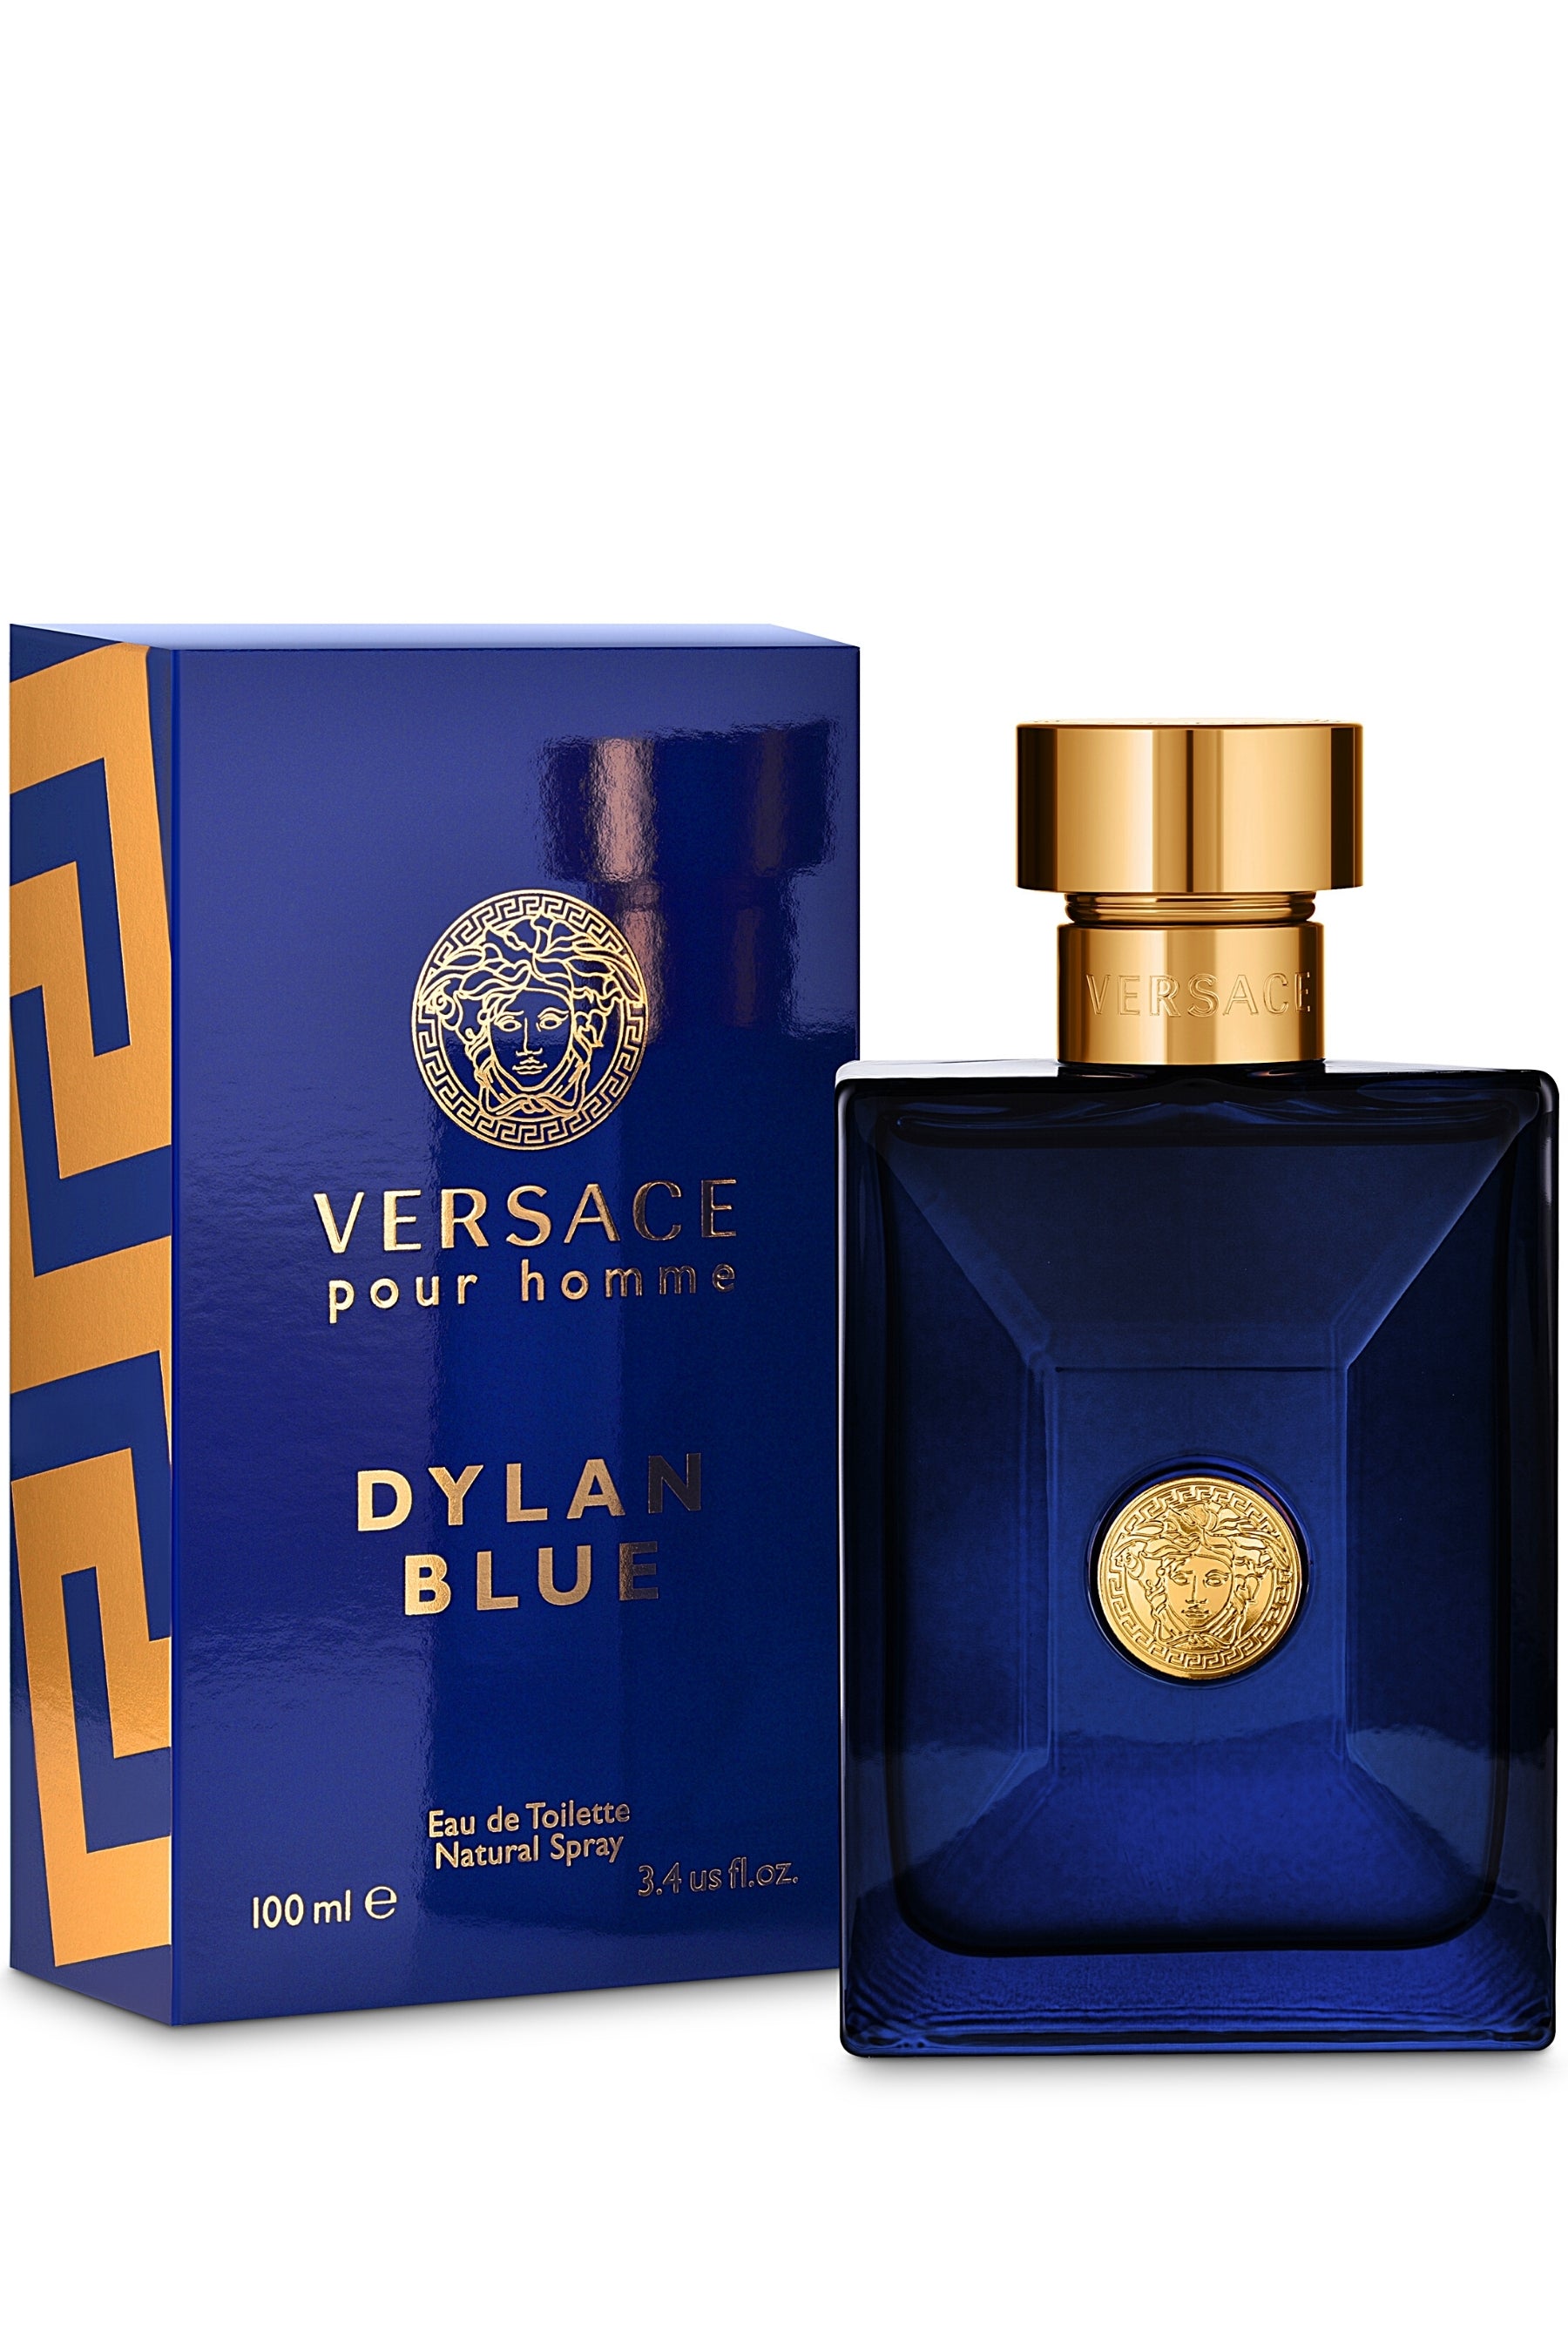 Versace Pour Homme Dylan Blue by Versace 3.4 Oz EDT Cologne for Men New In  Box